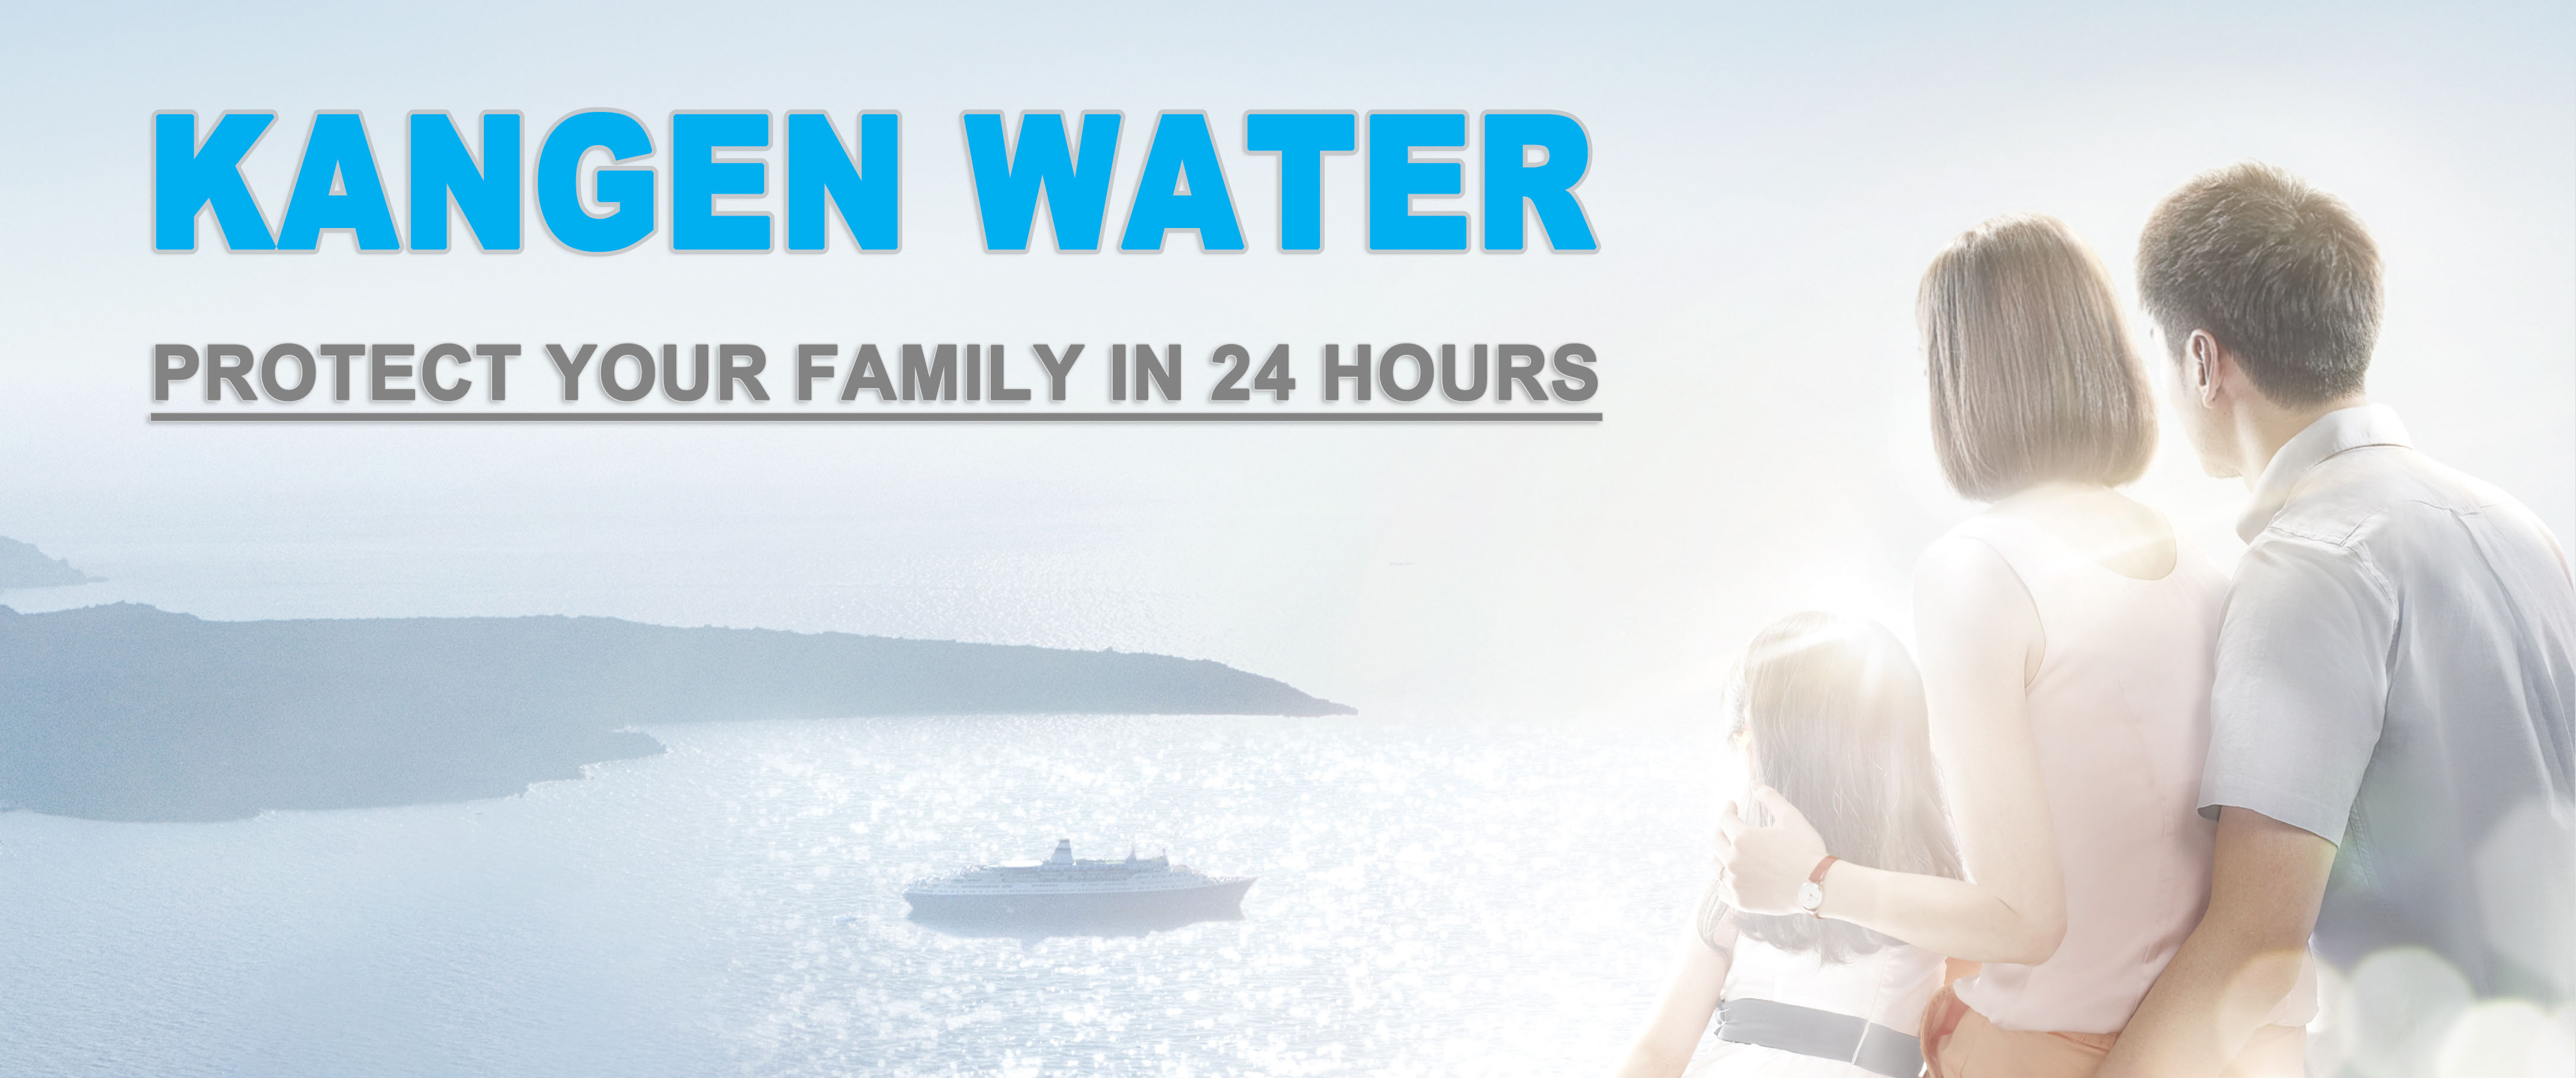 An Enagic Kangenwater Machine Can Keep Your family Healthy